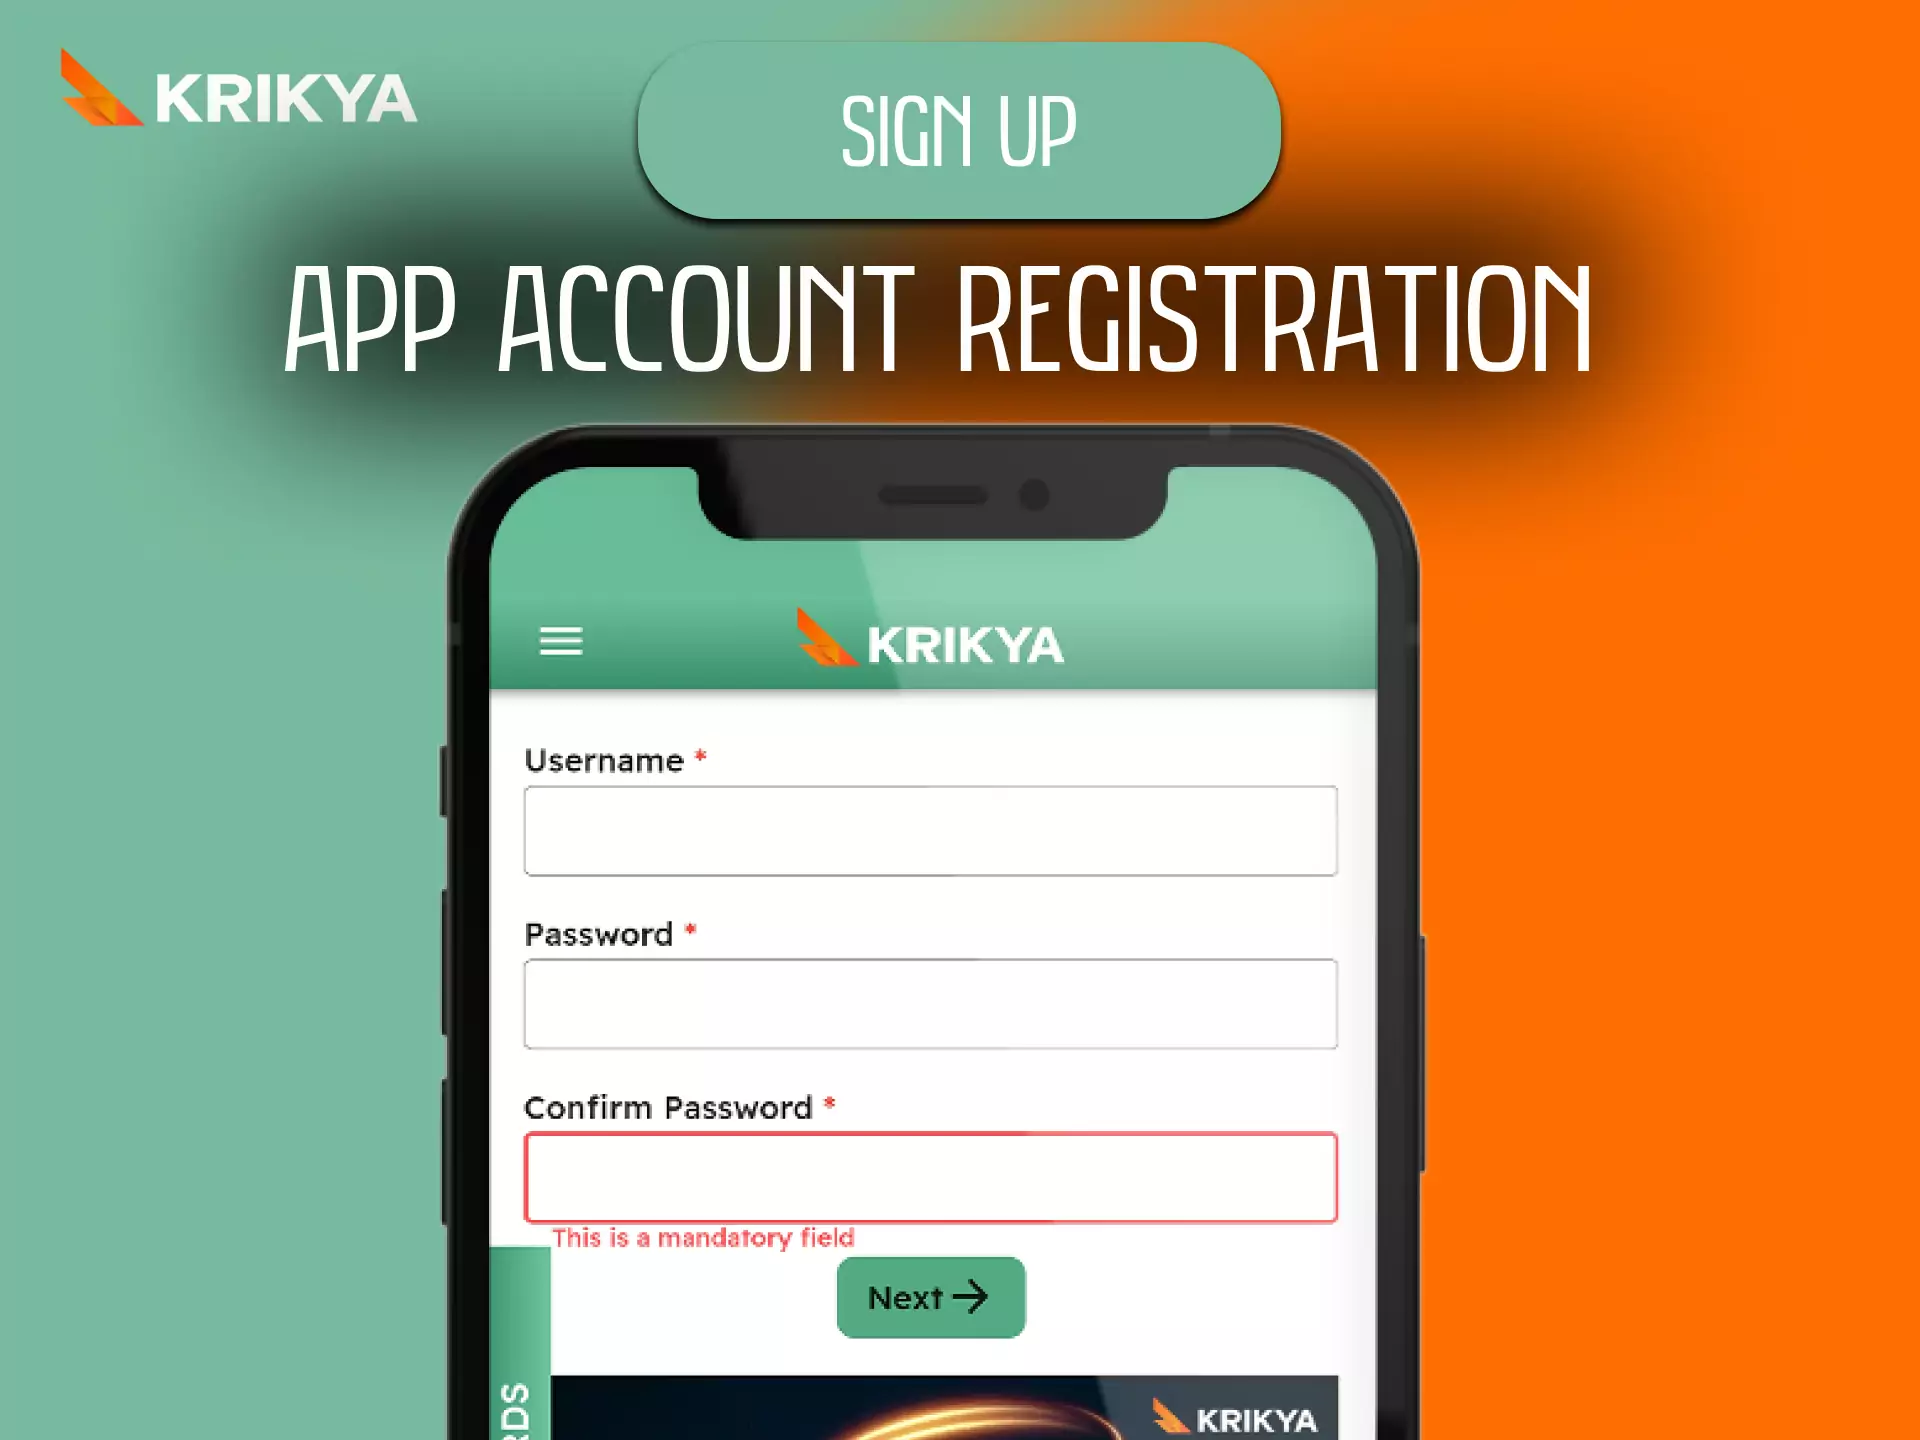 In the Krikya app, go through a simple registration and use all the features and bonuses.